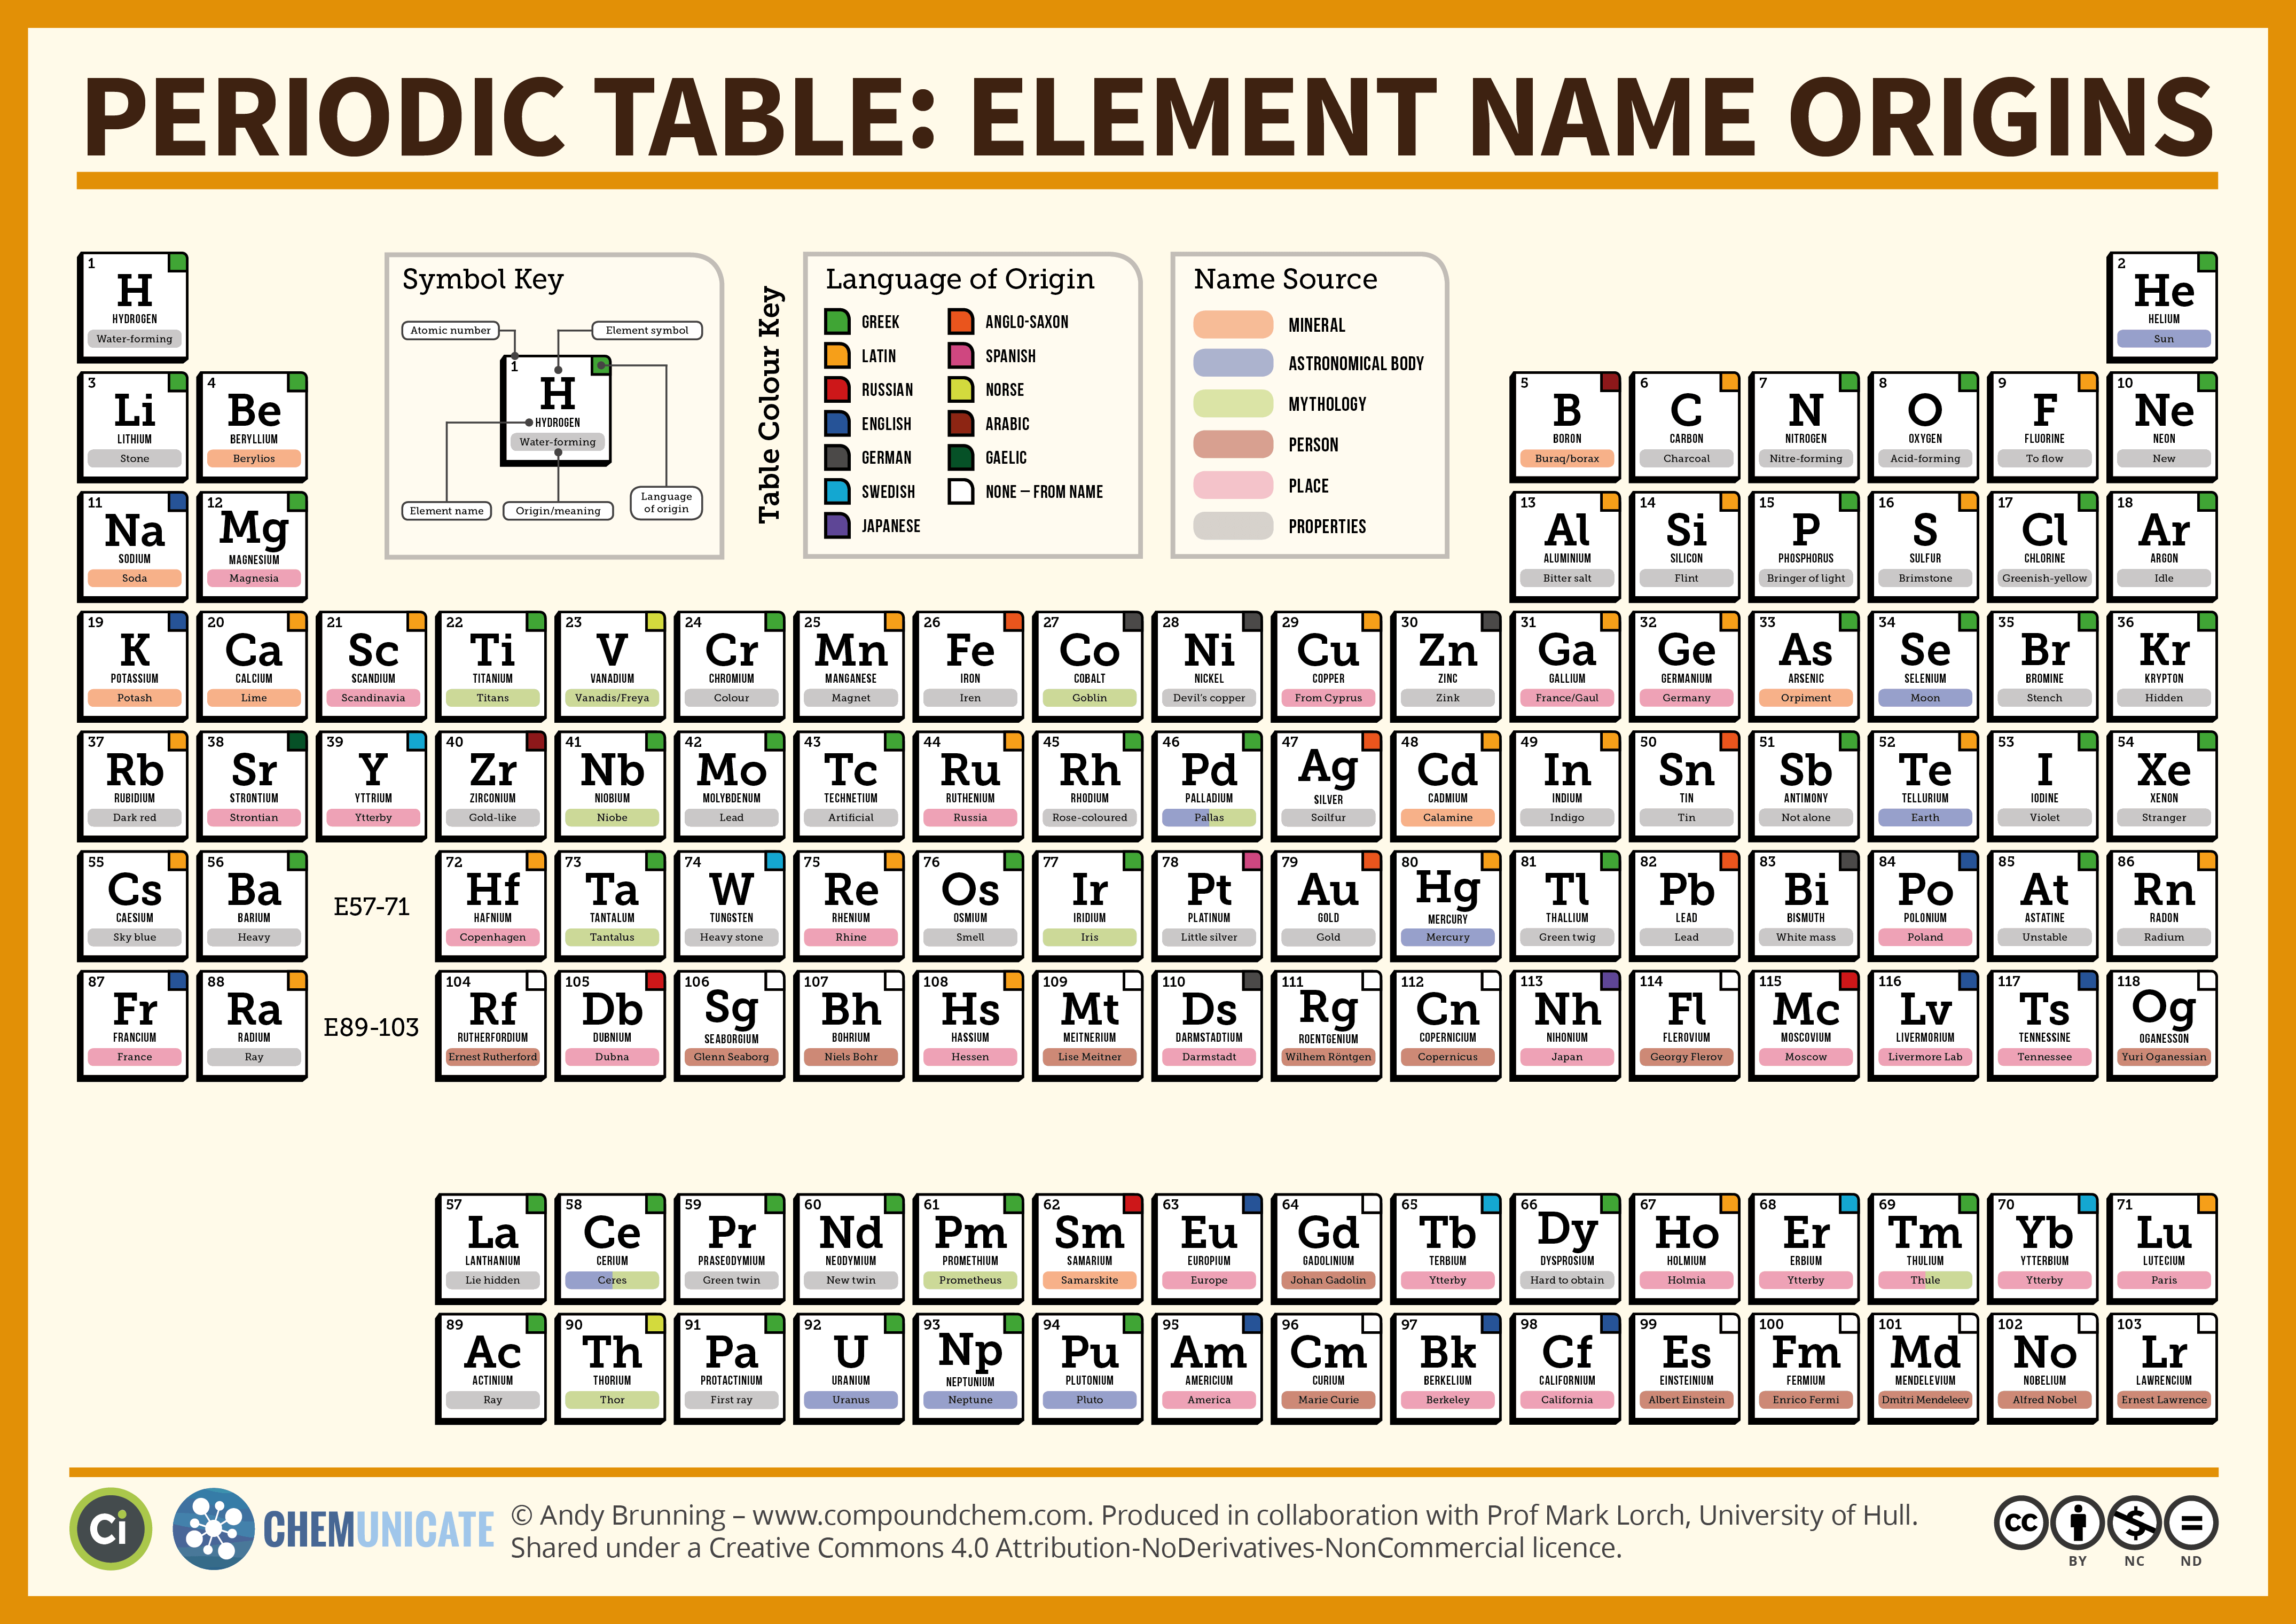 Name an element